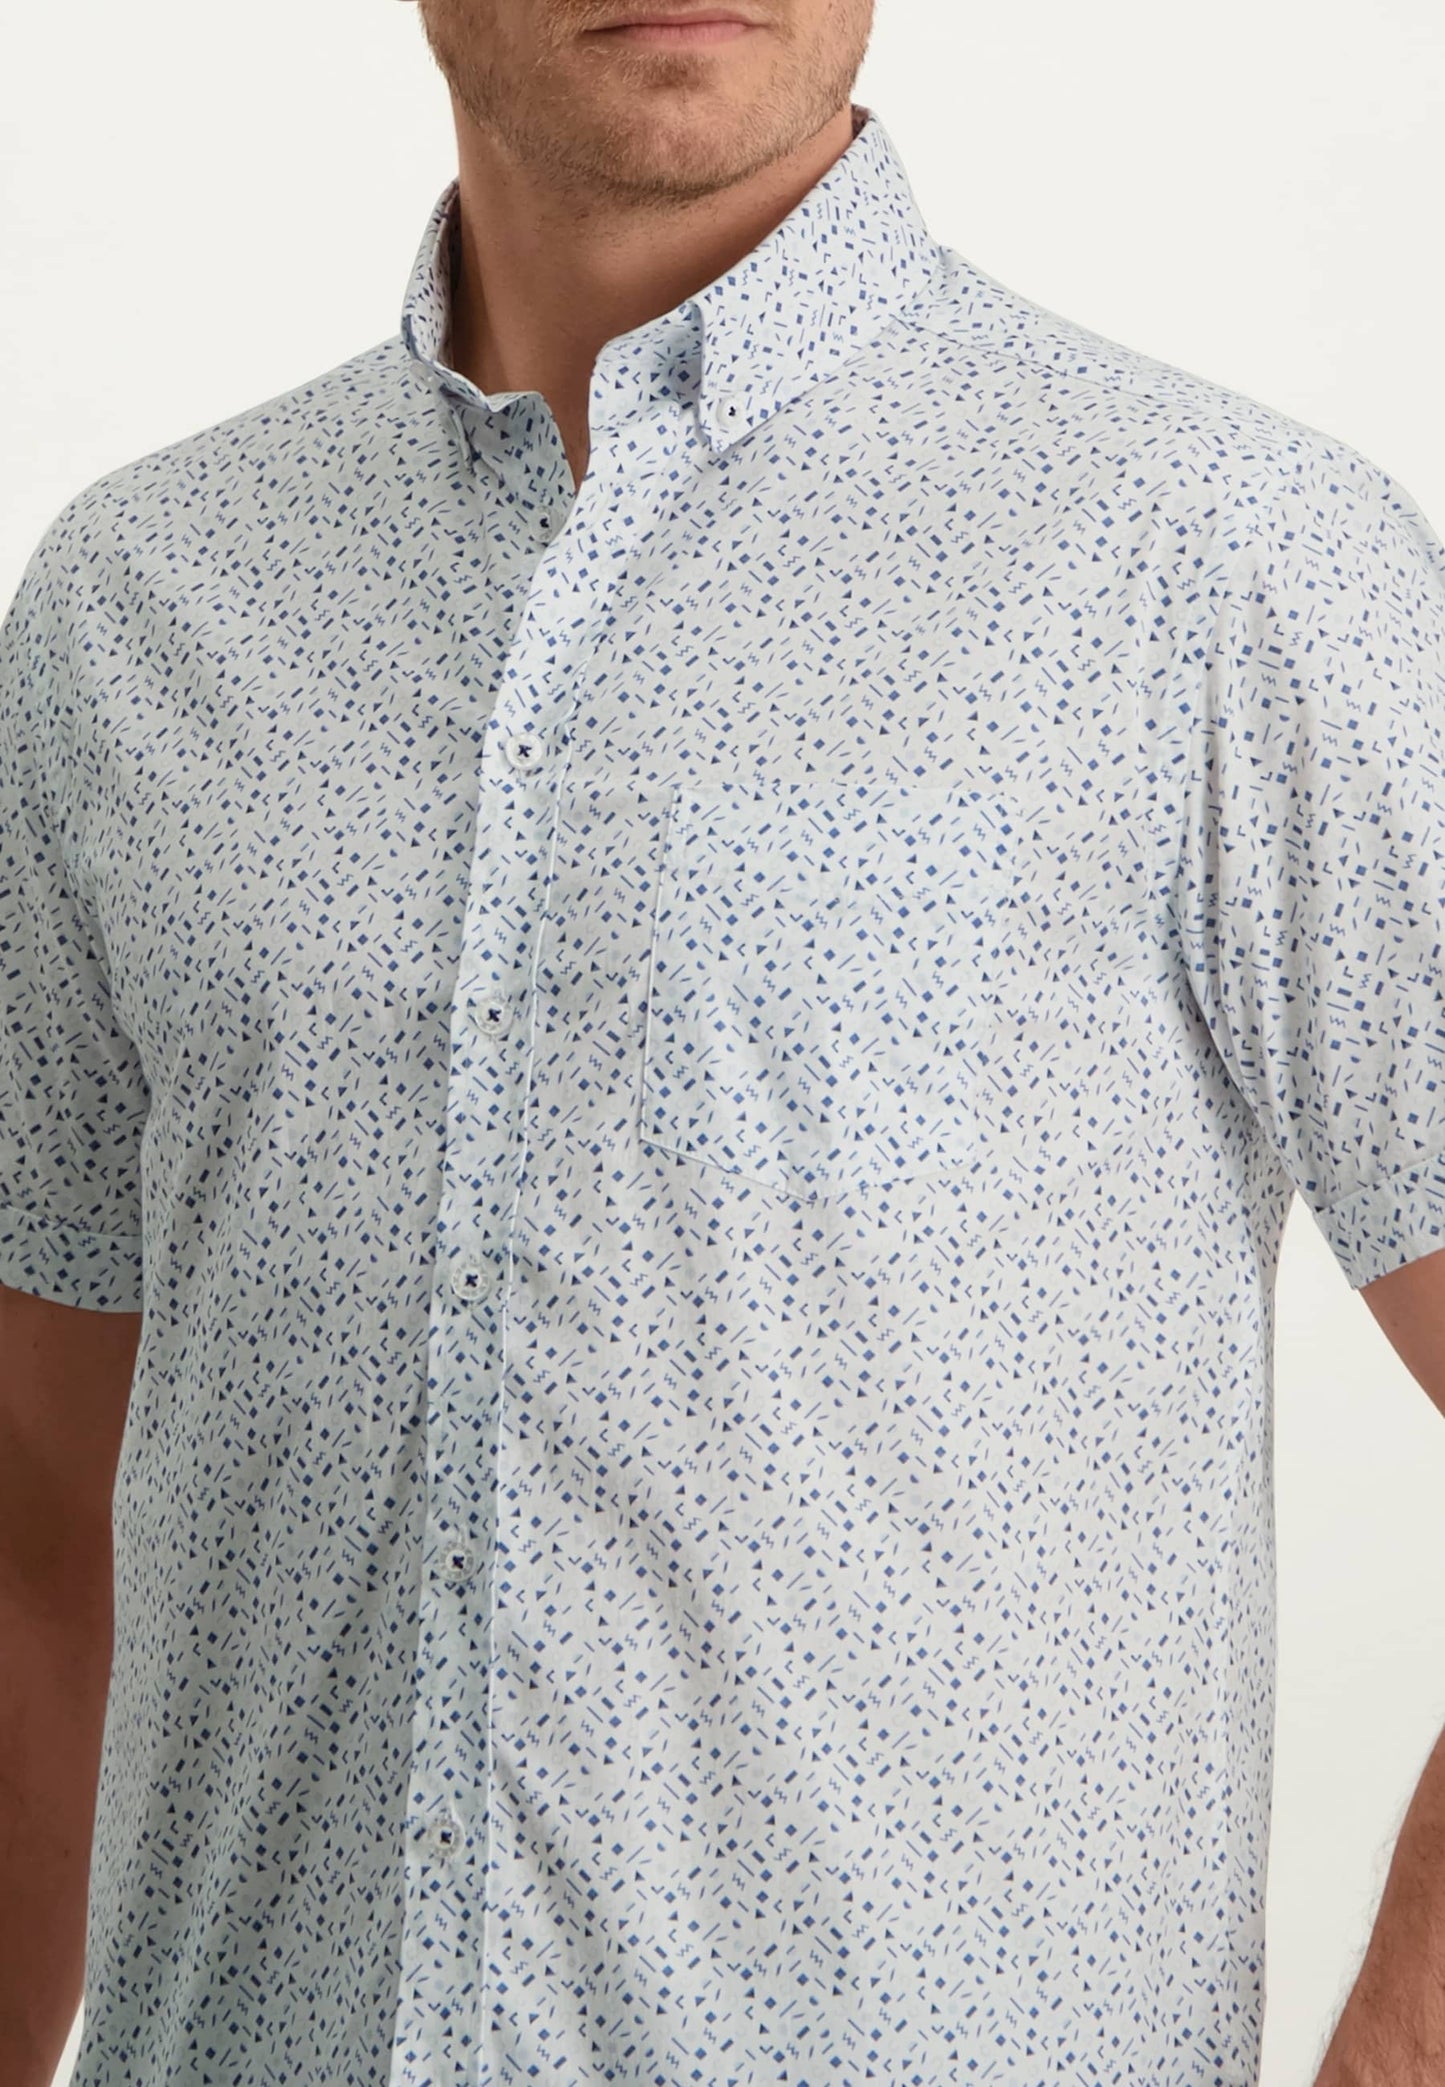 Blue cotton short sleeve regular fit shirt with print State of Art - 13287/1153